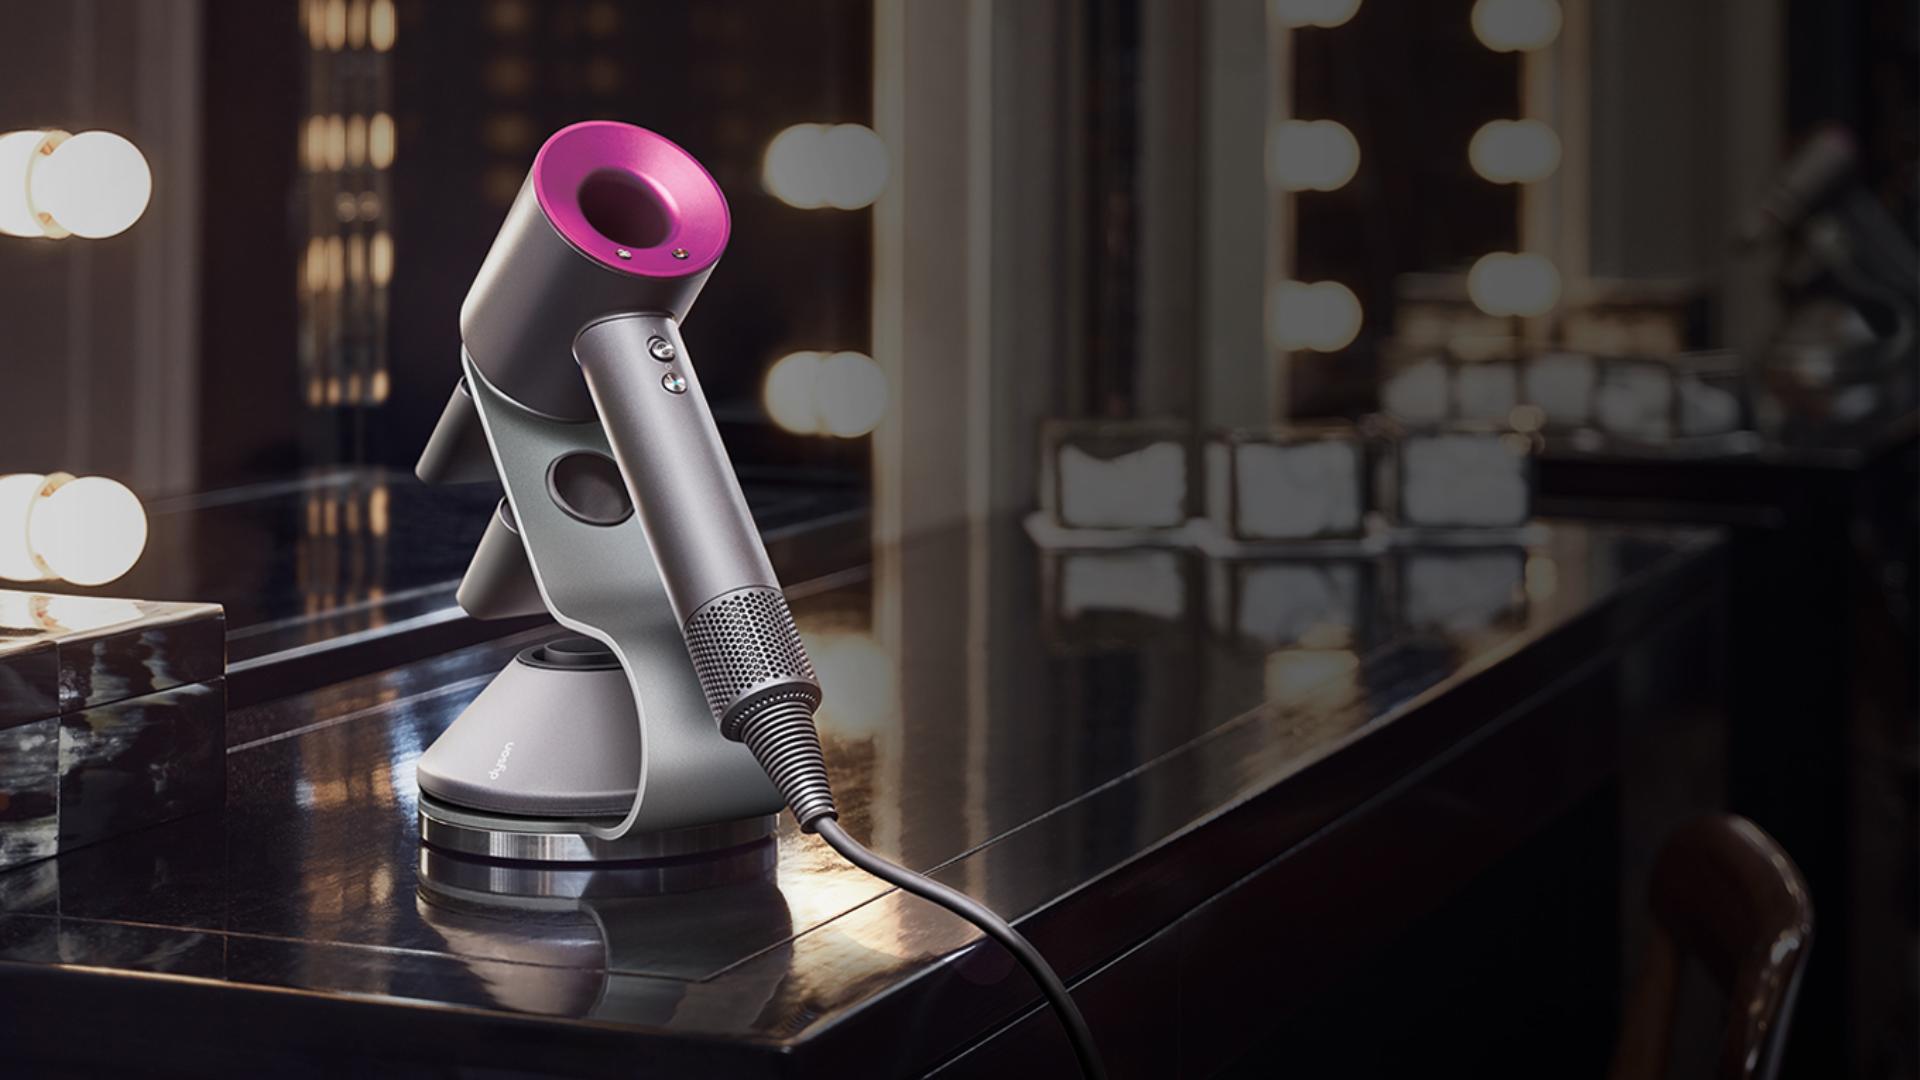 Dyson Supersonic hair dryer on a desk in a hotel room